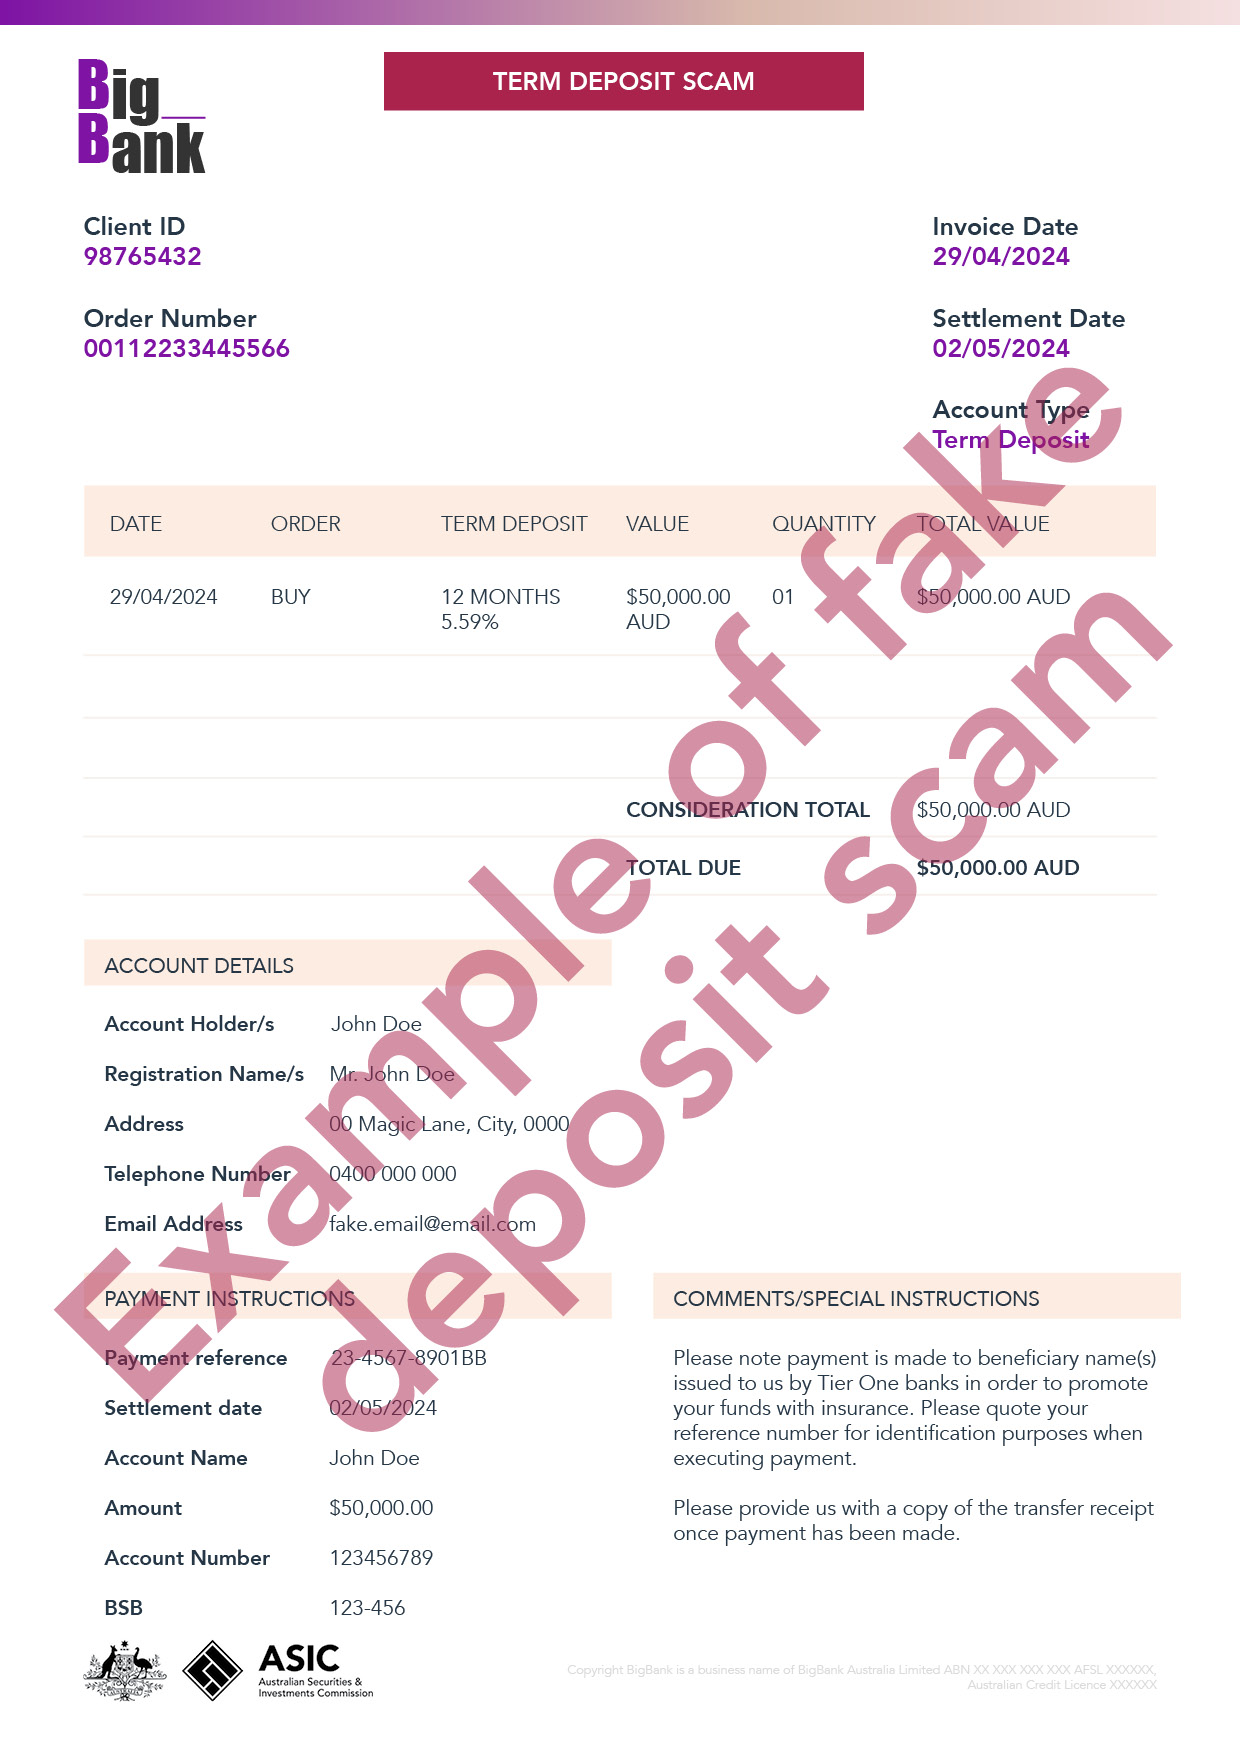 Example 2: Term deposit scam – a fake investment document showing a client segregated account that is in the consumer’s name.